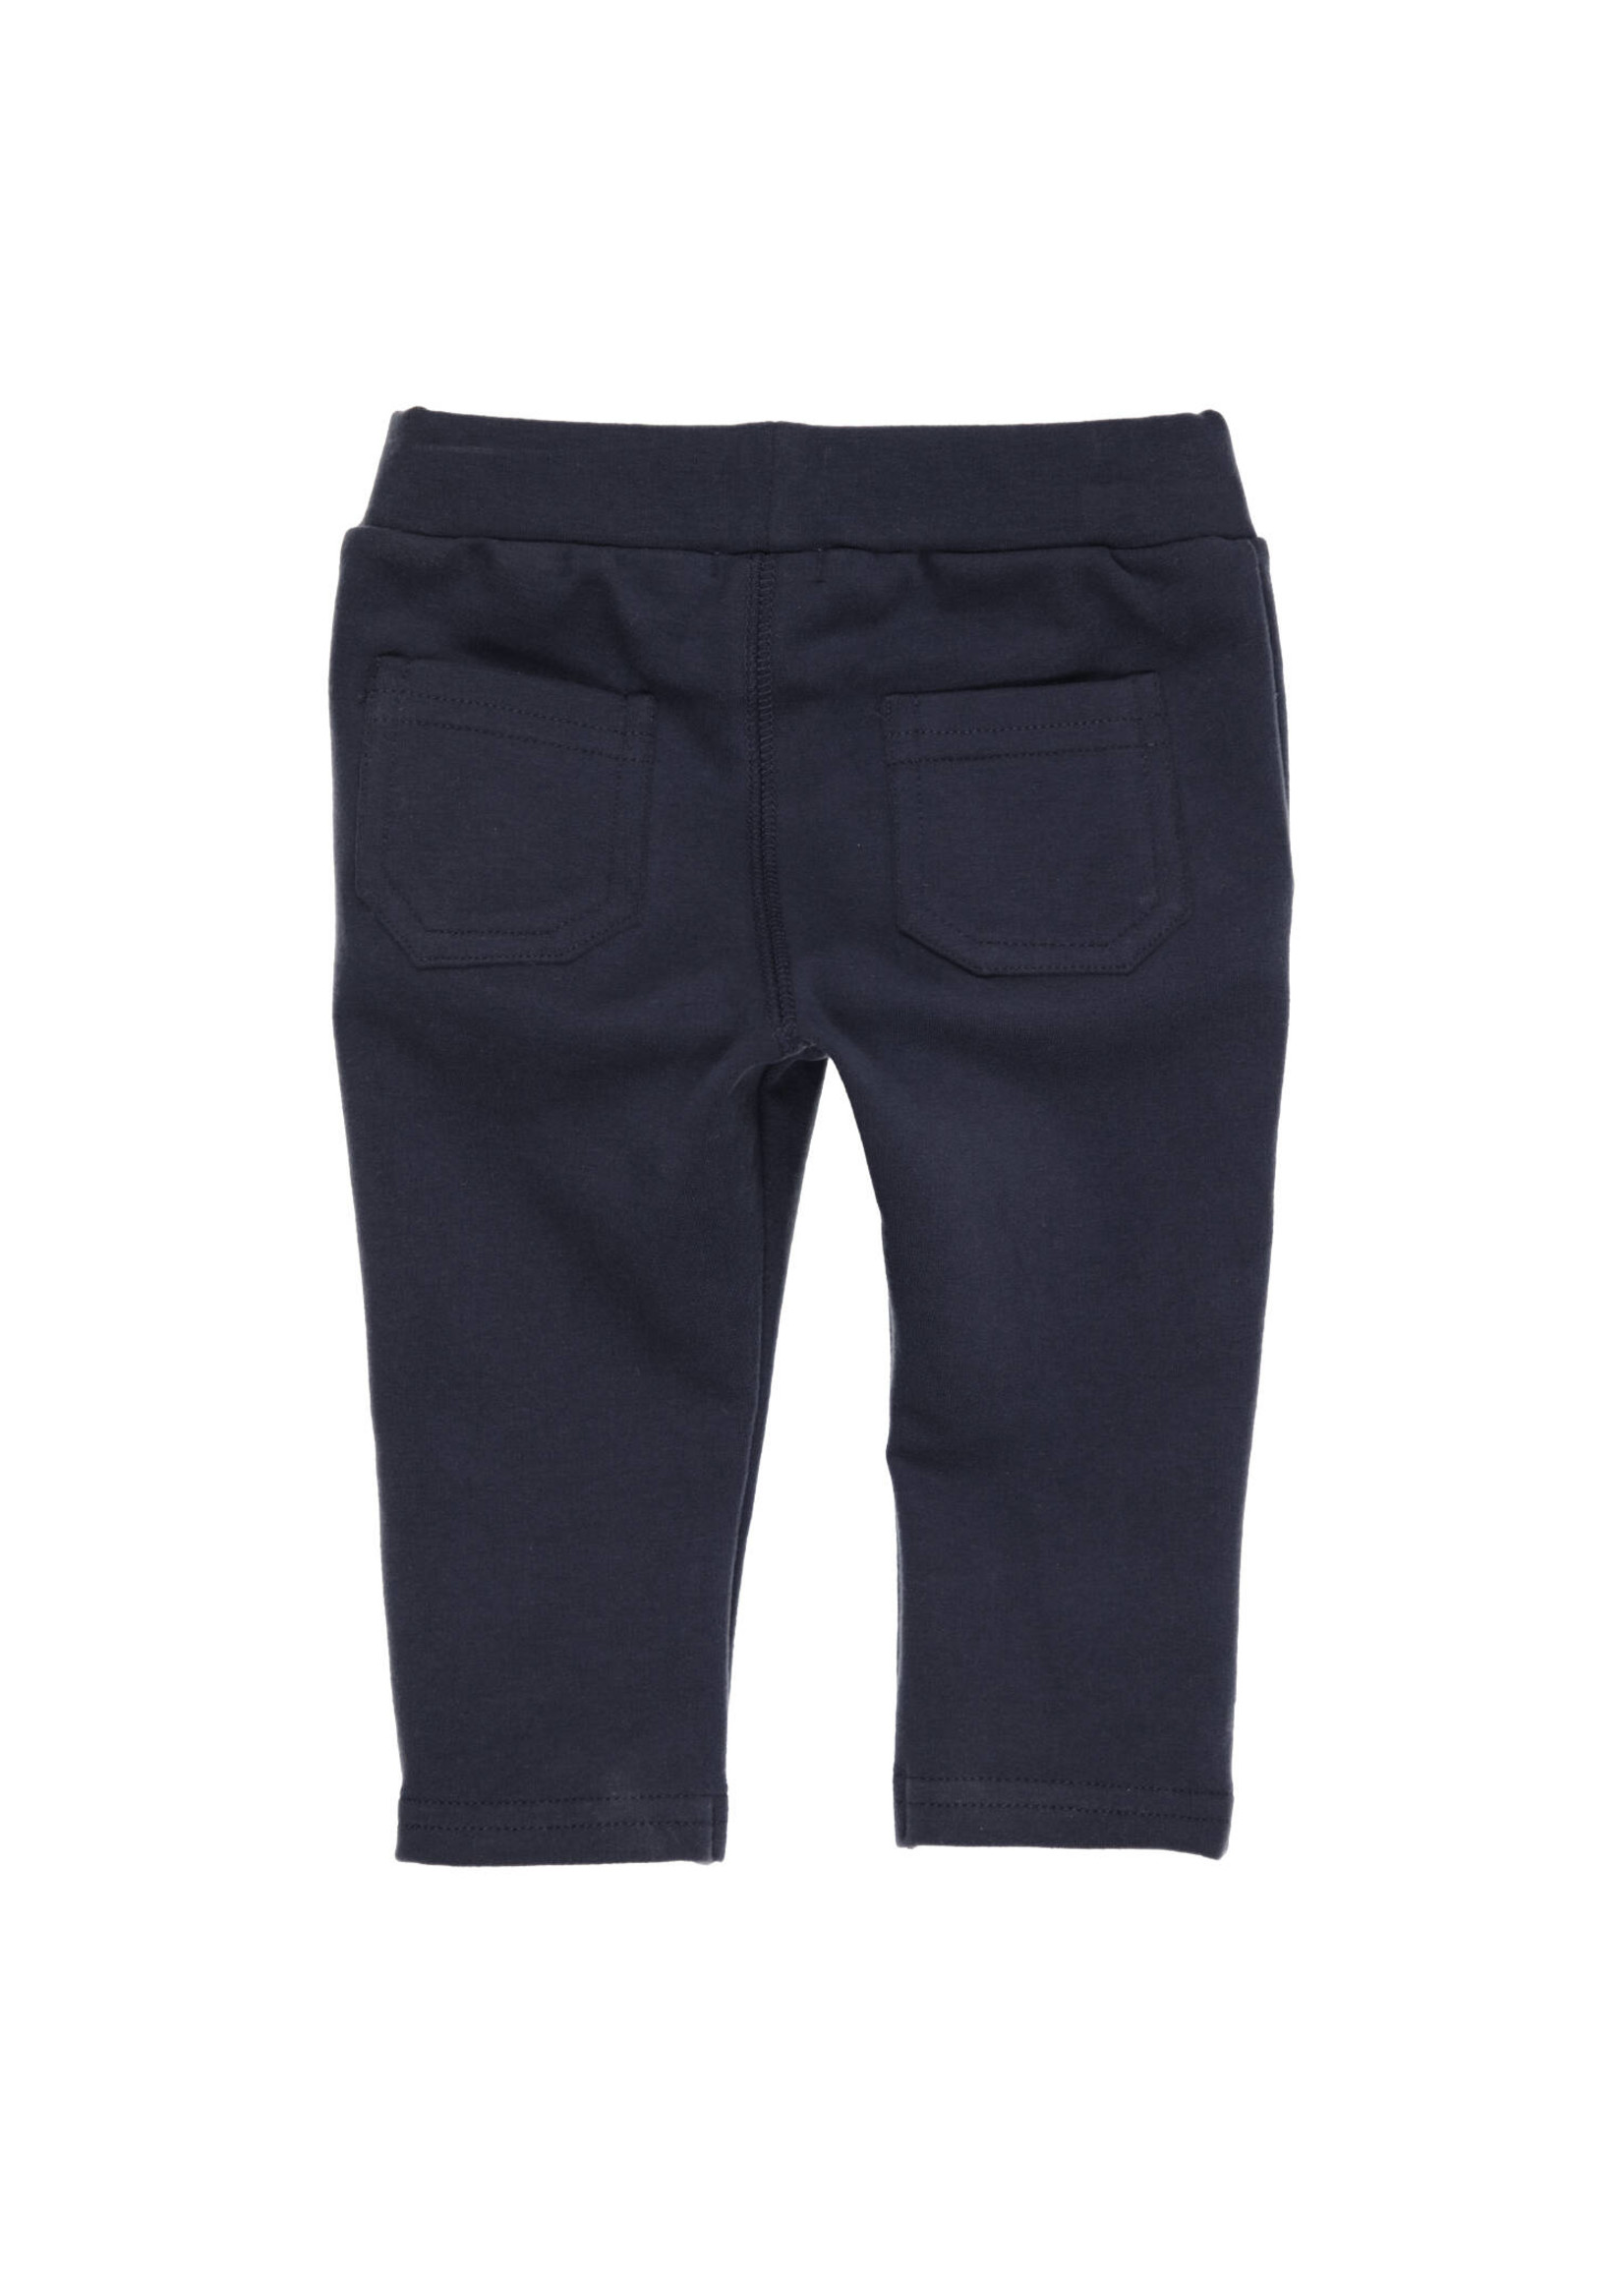 Gymp Trousers Carbon Navy 410-3348-20